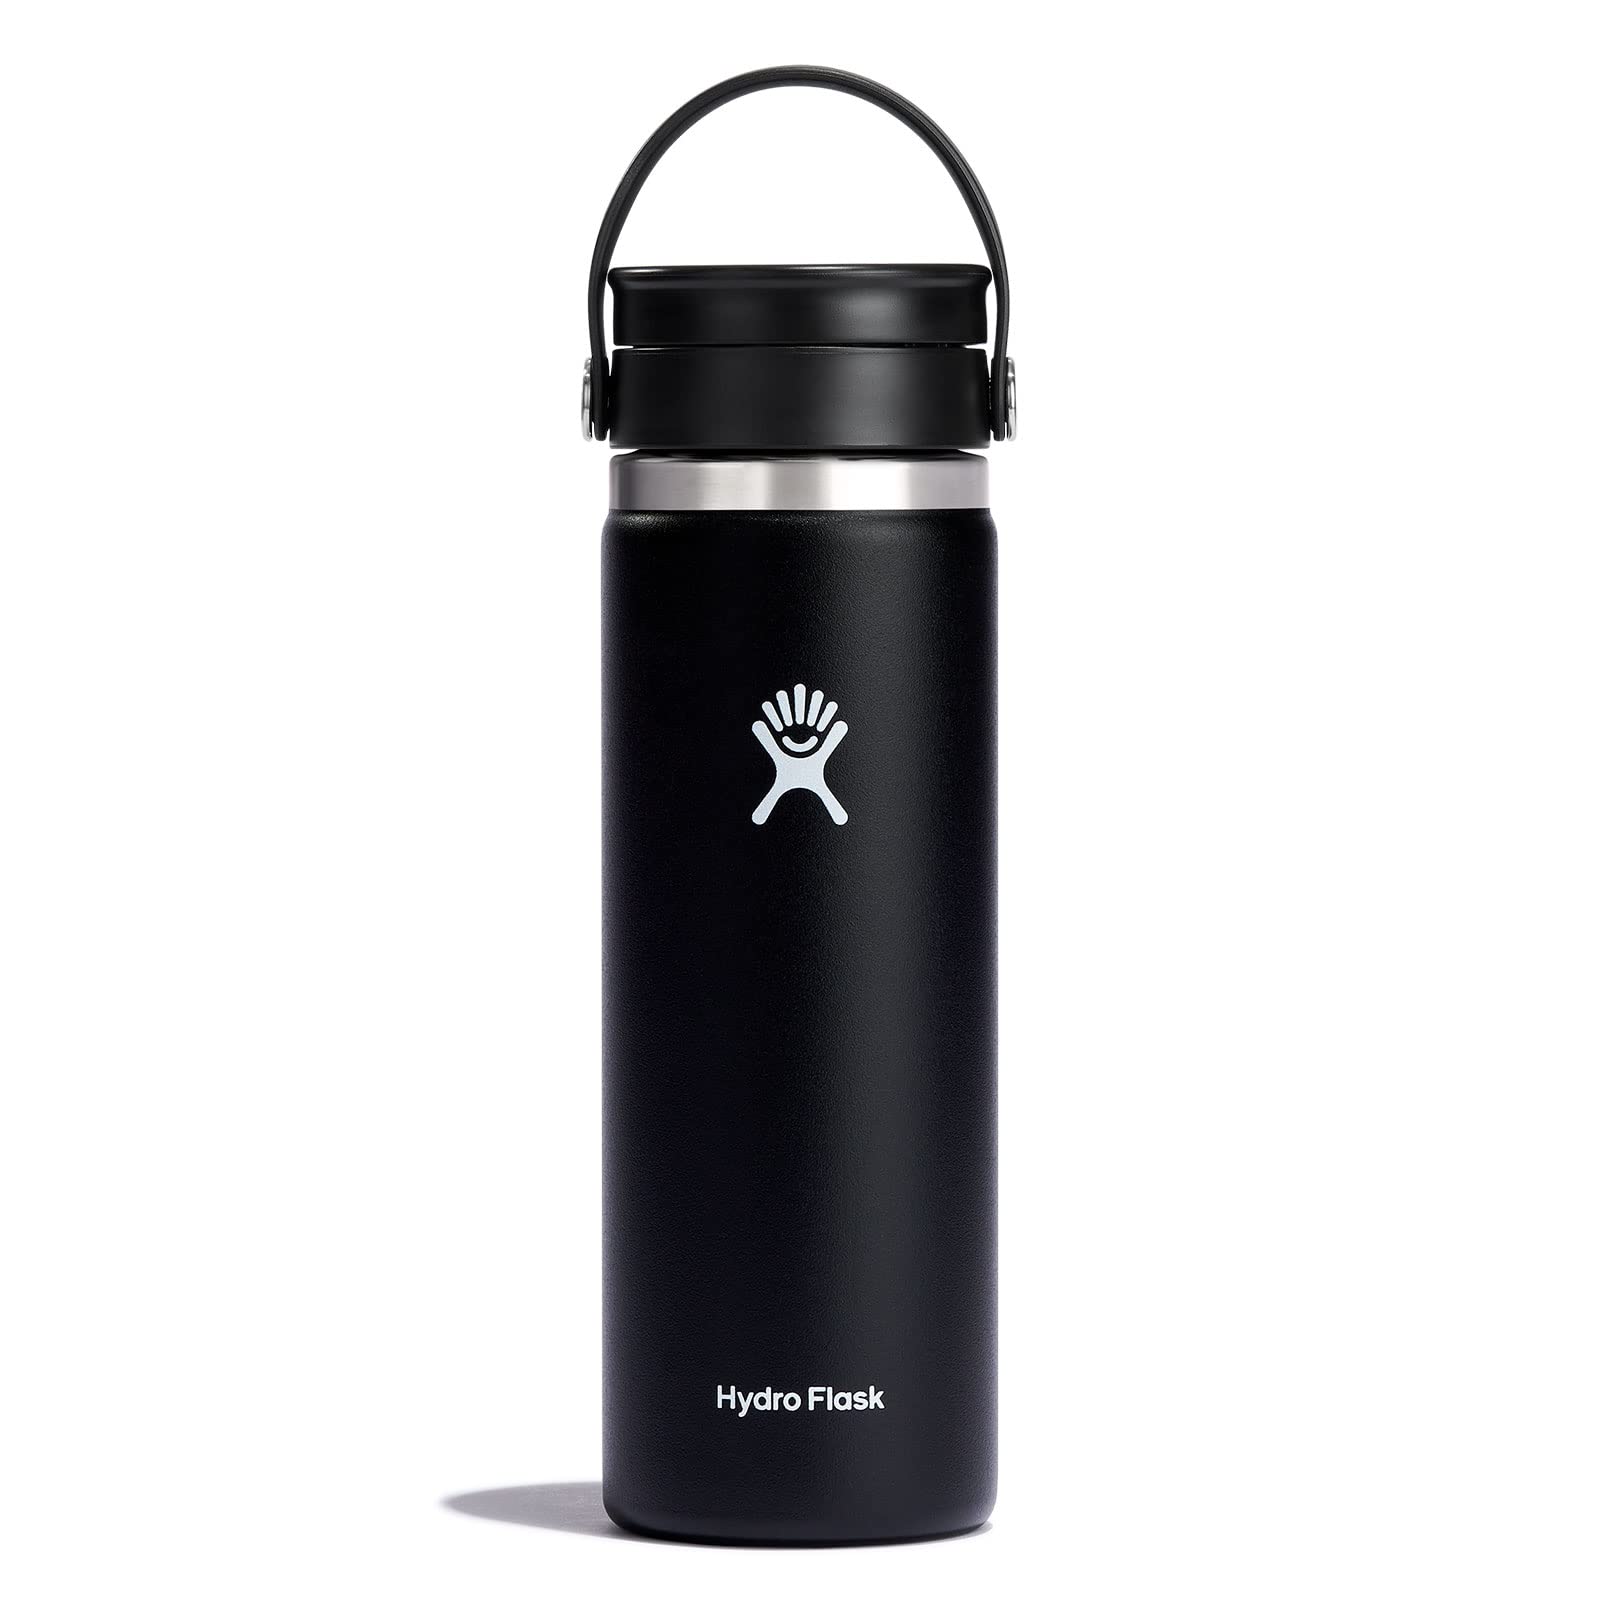 20-Oz Hydro Flask Wide Mouth Insulated Water Bottle w/ Flex Sip Lid (Black) $16.12 + Free Shipping w/ Prime or on orders $35+